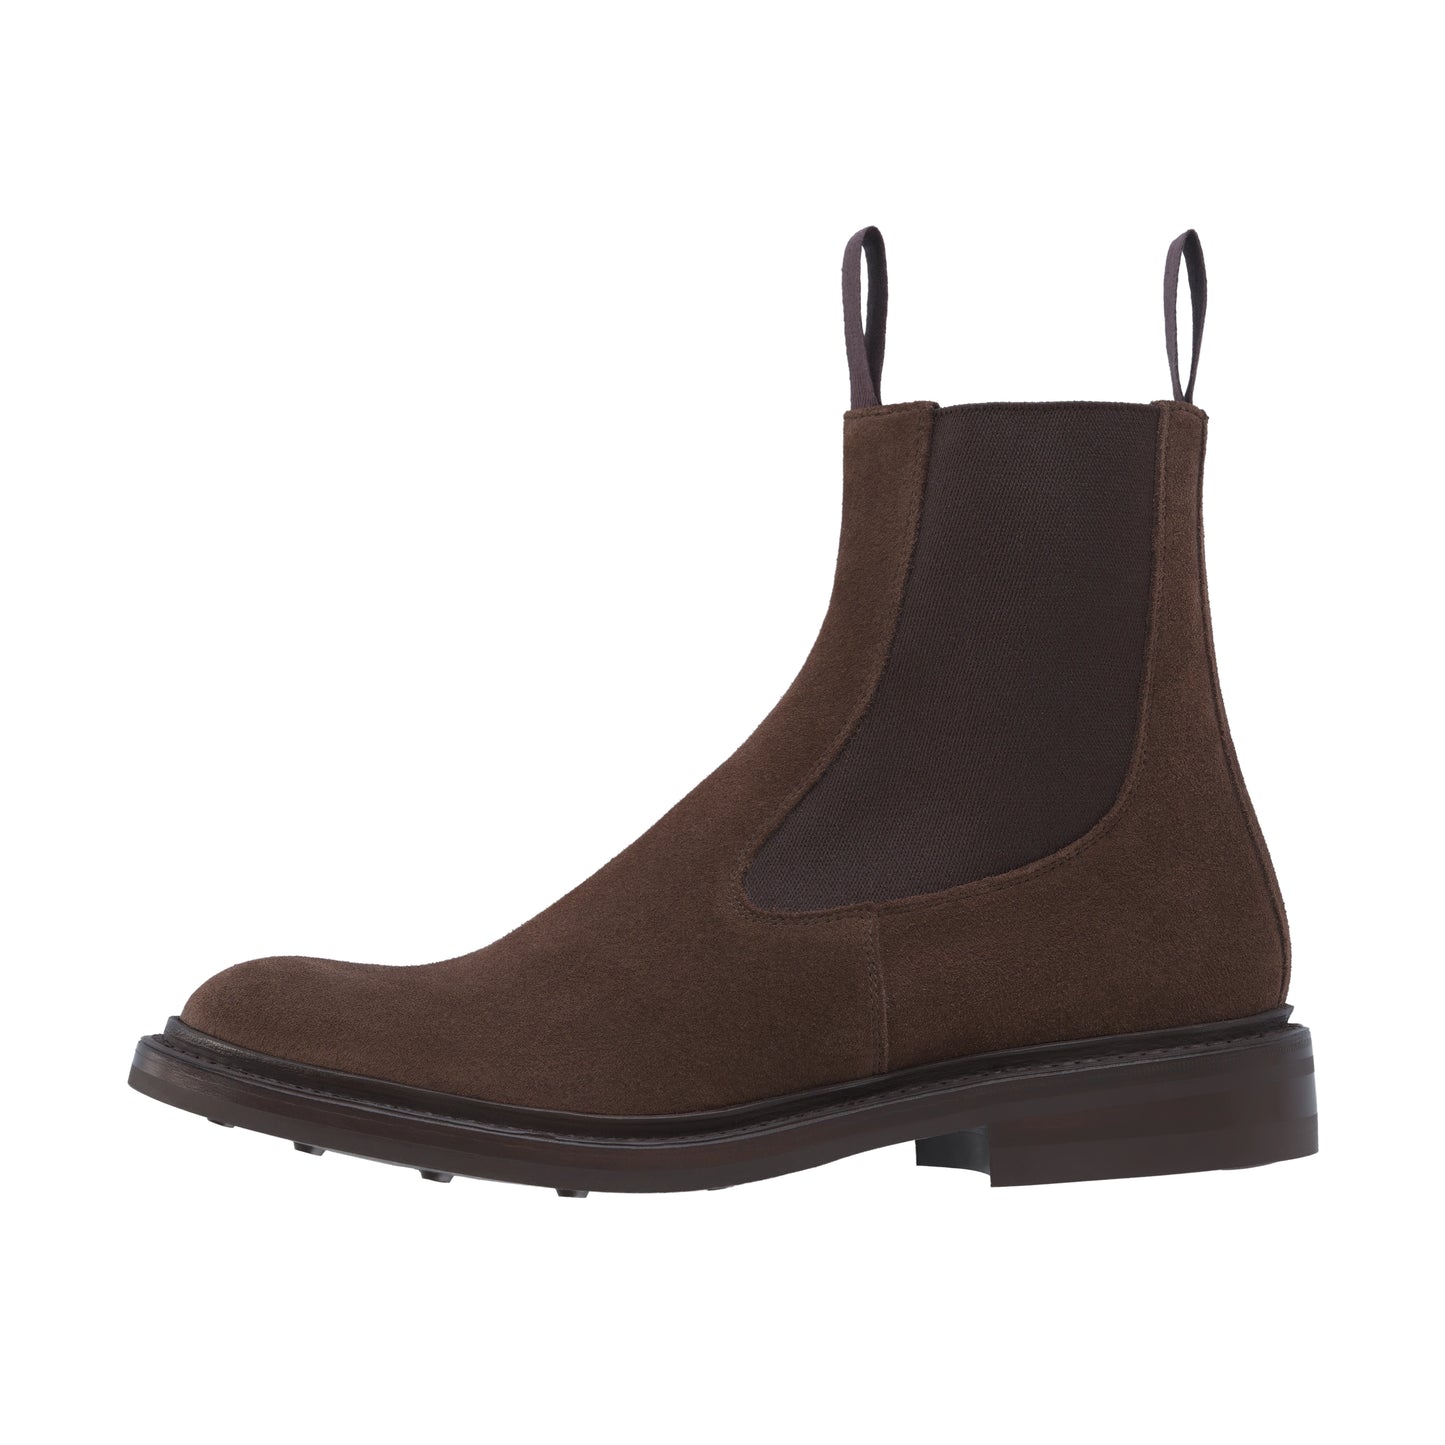 "Stephen" Suede Slip-On Chelsea Boots in Coffee